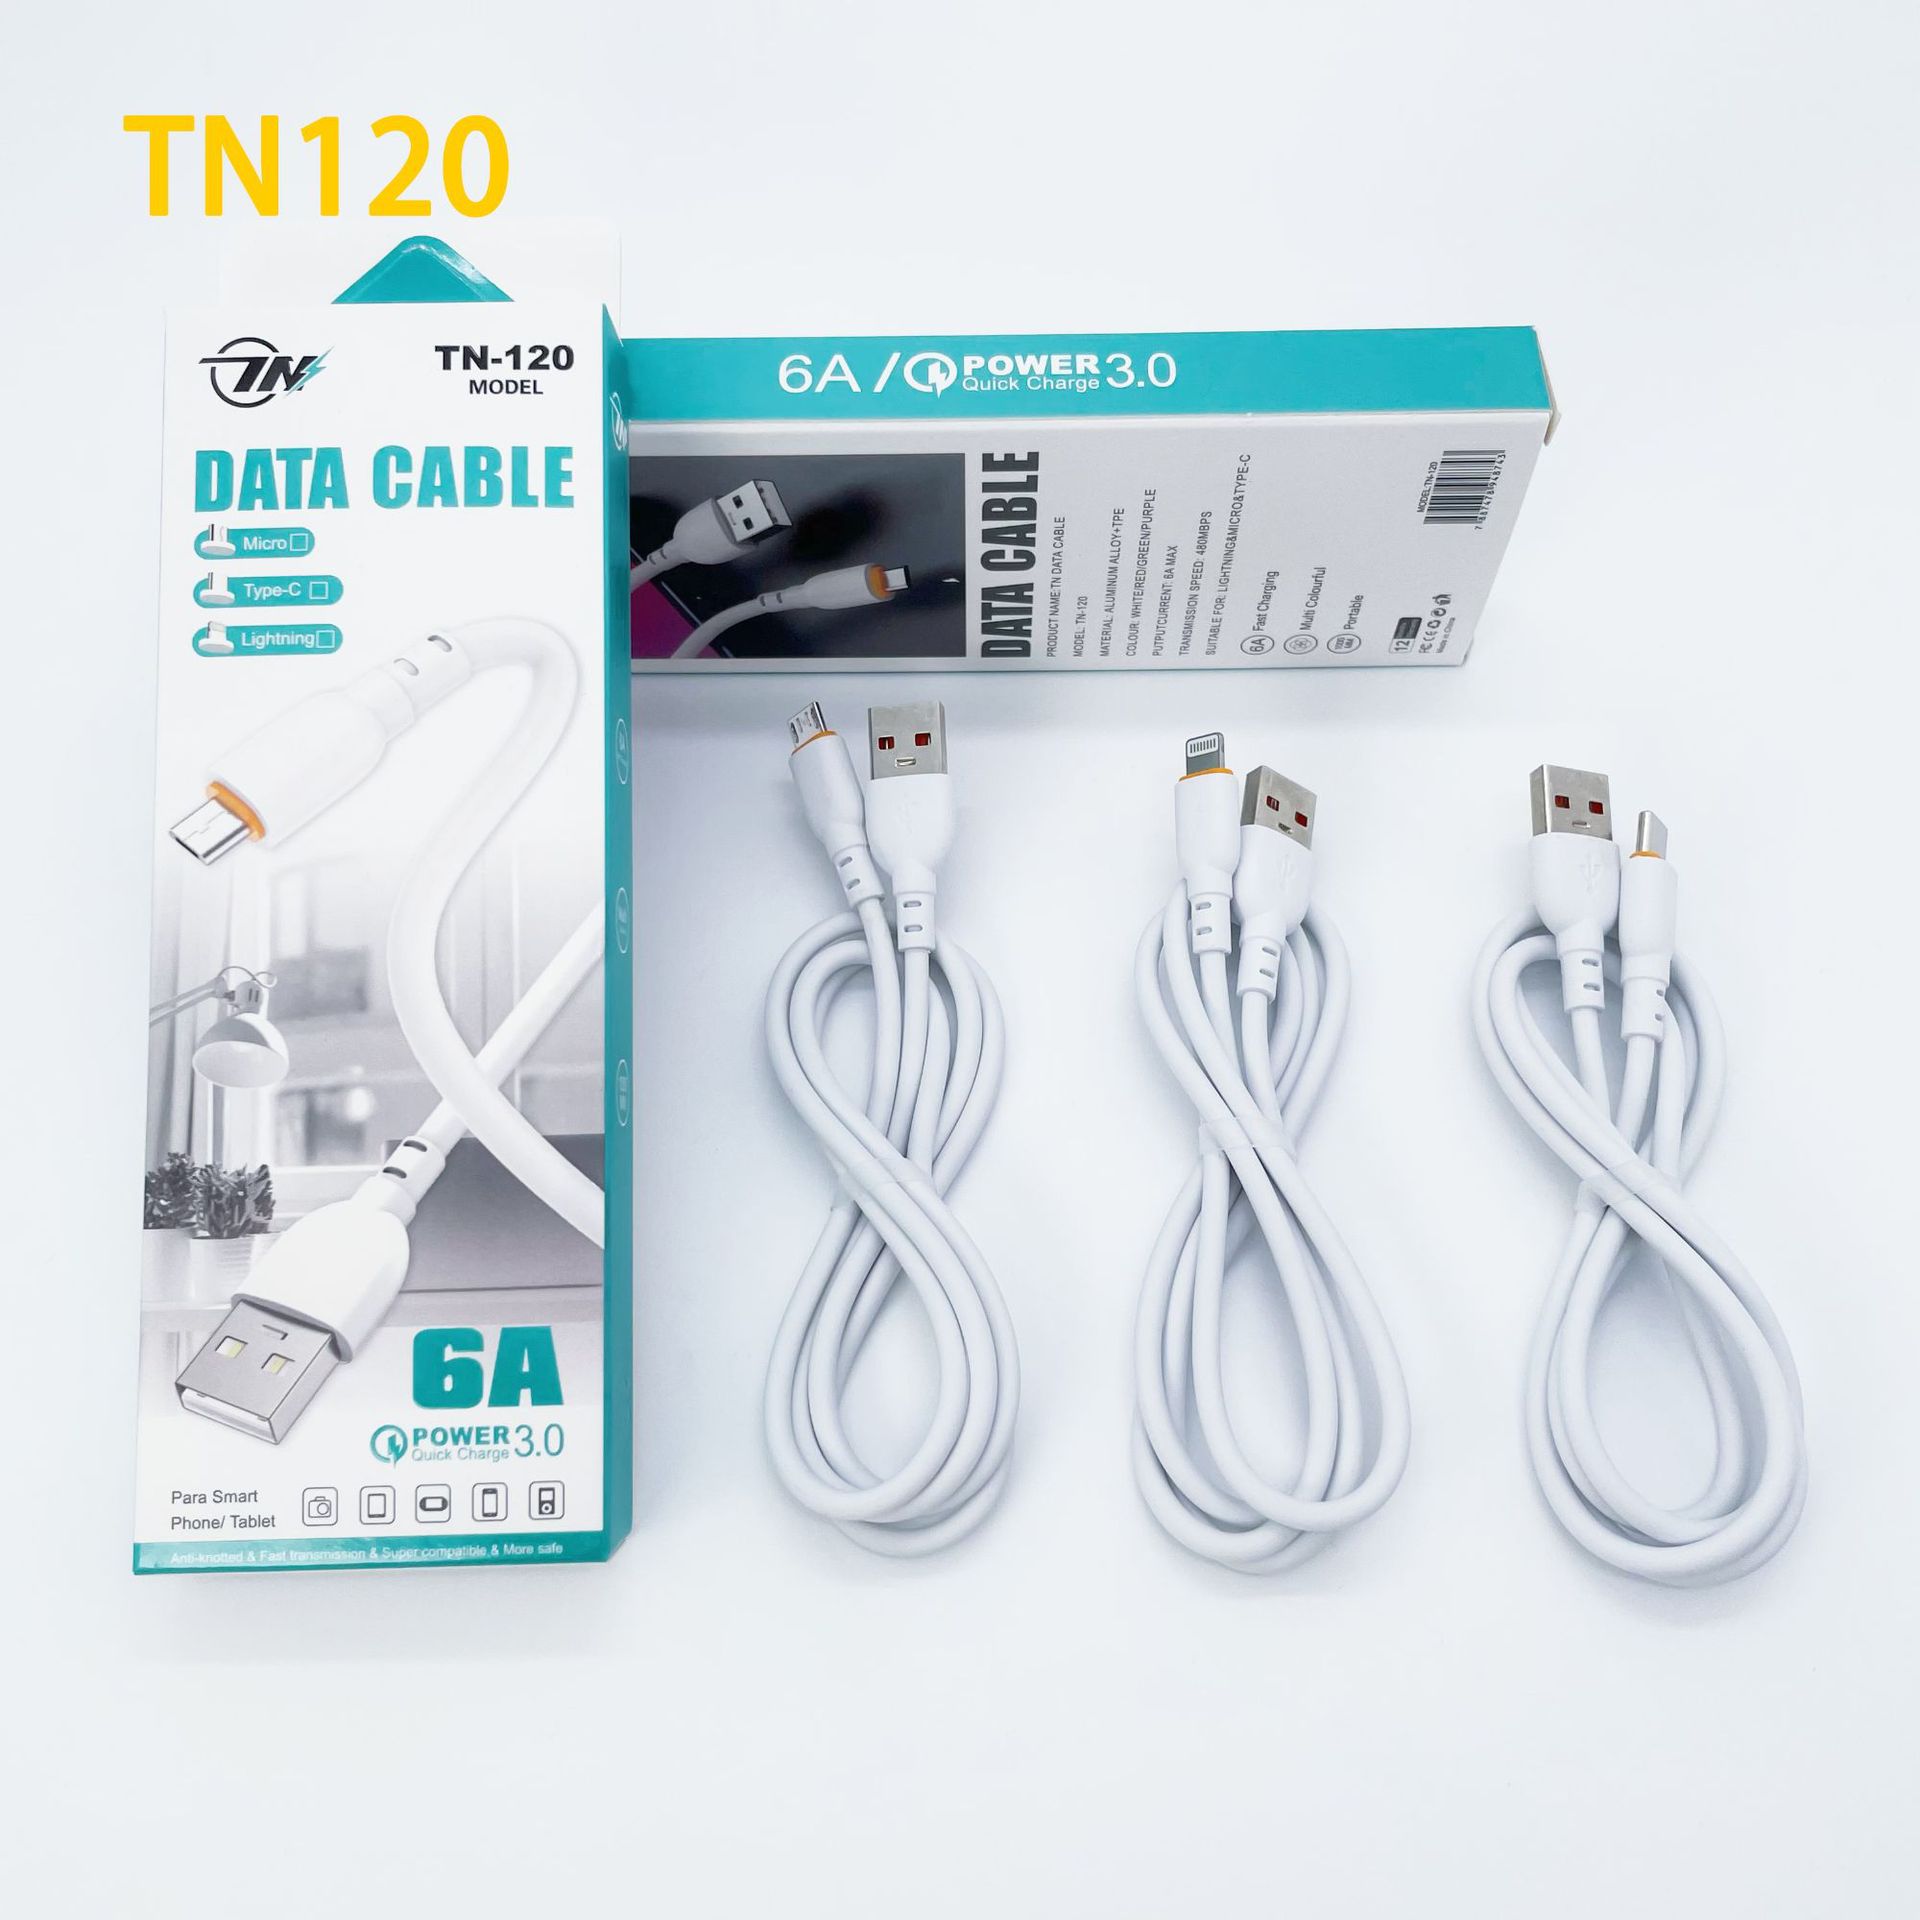 Tn120 New PVC Fast Charge Data Cable Support I5 Android TC Smartphone Qc3.0 Function Delivery Supported